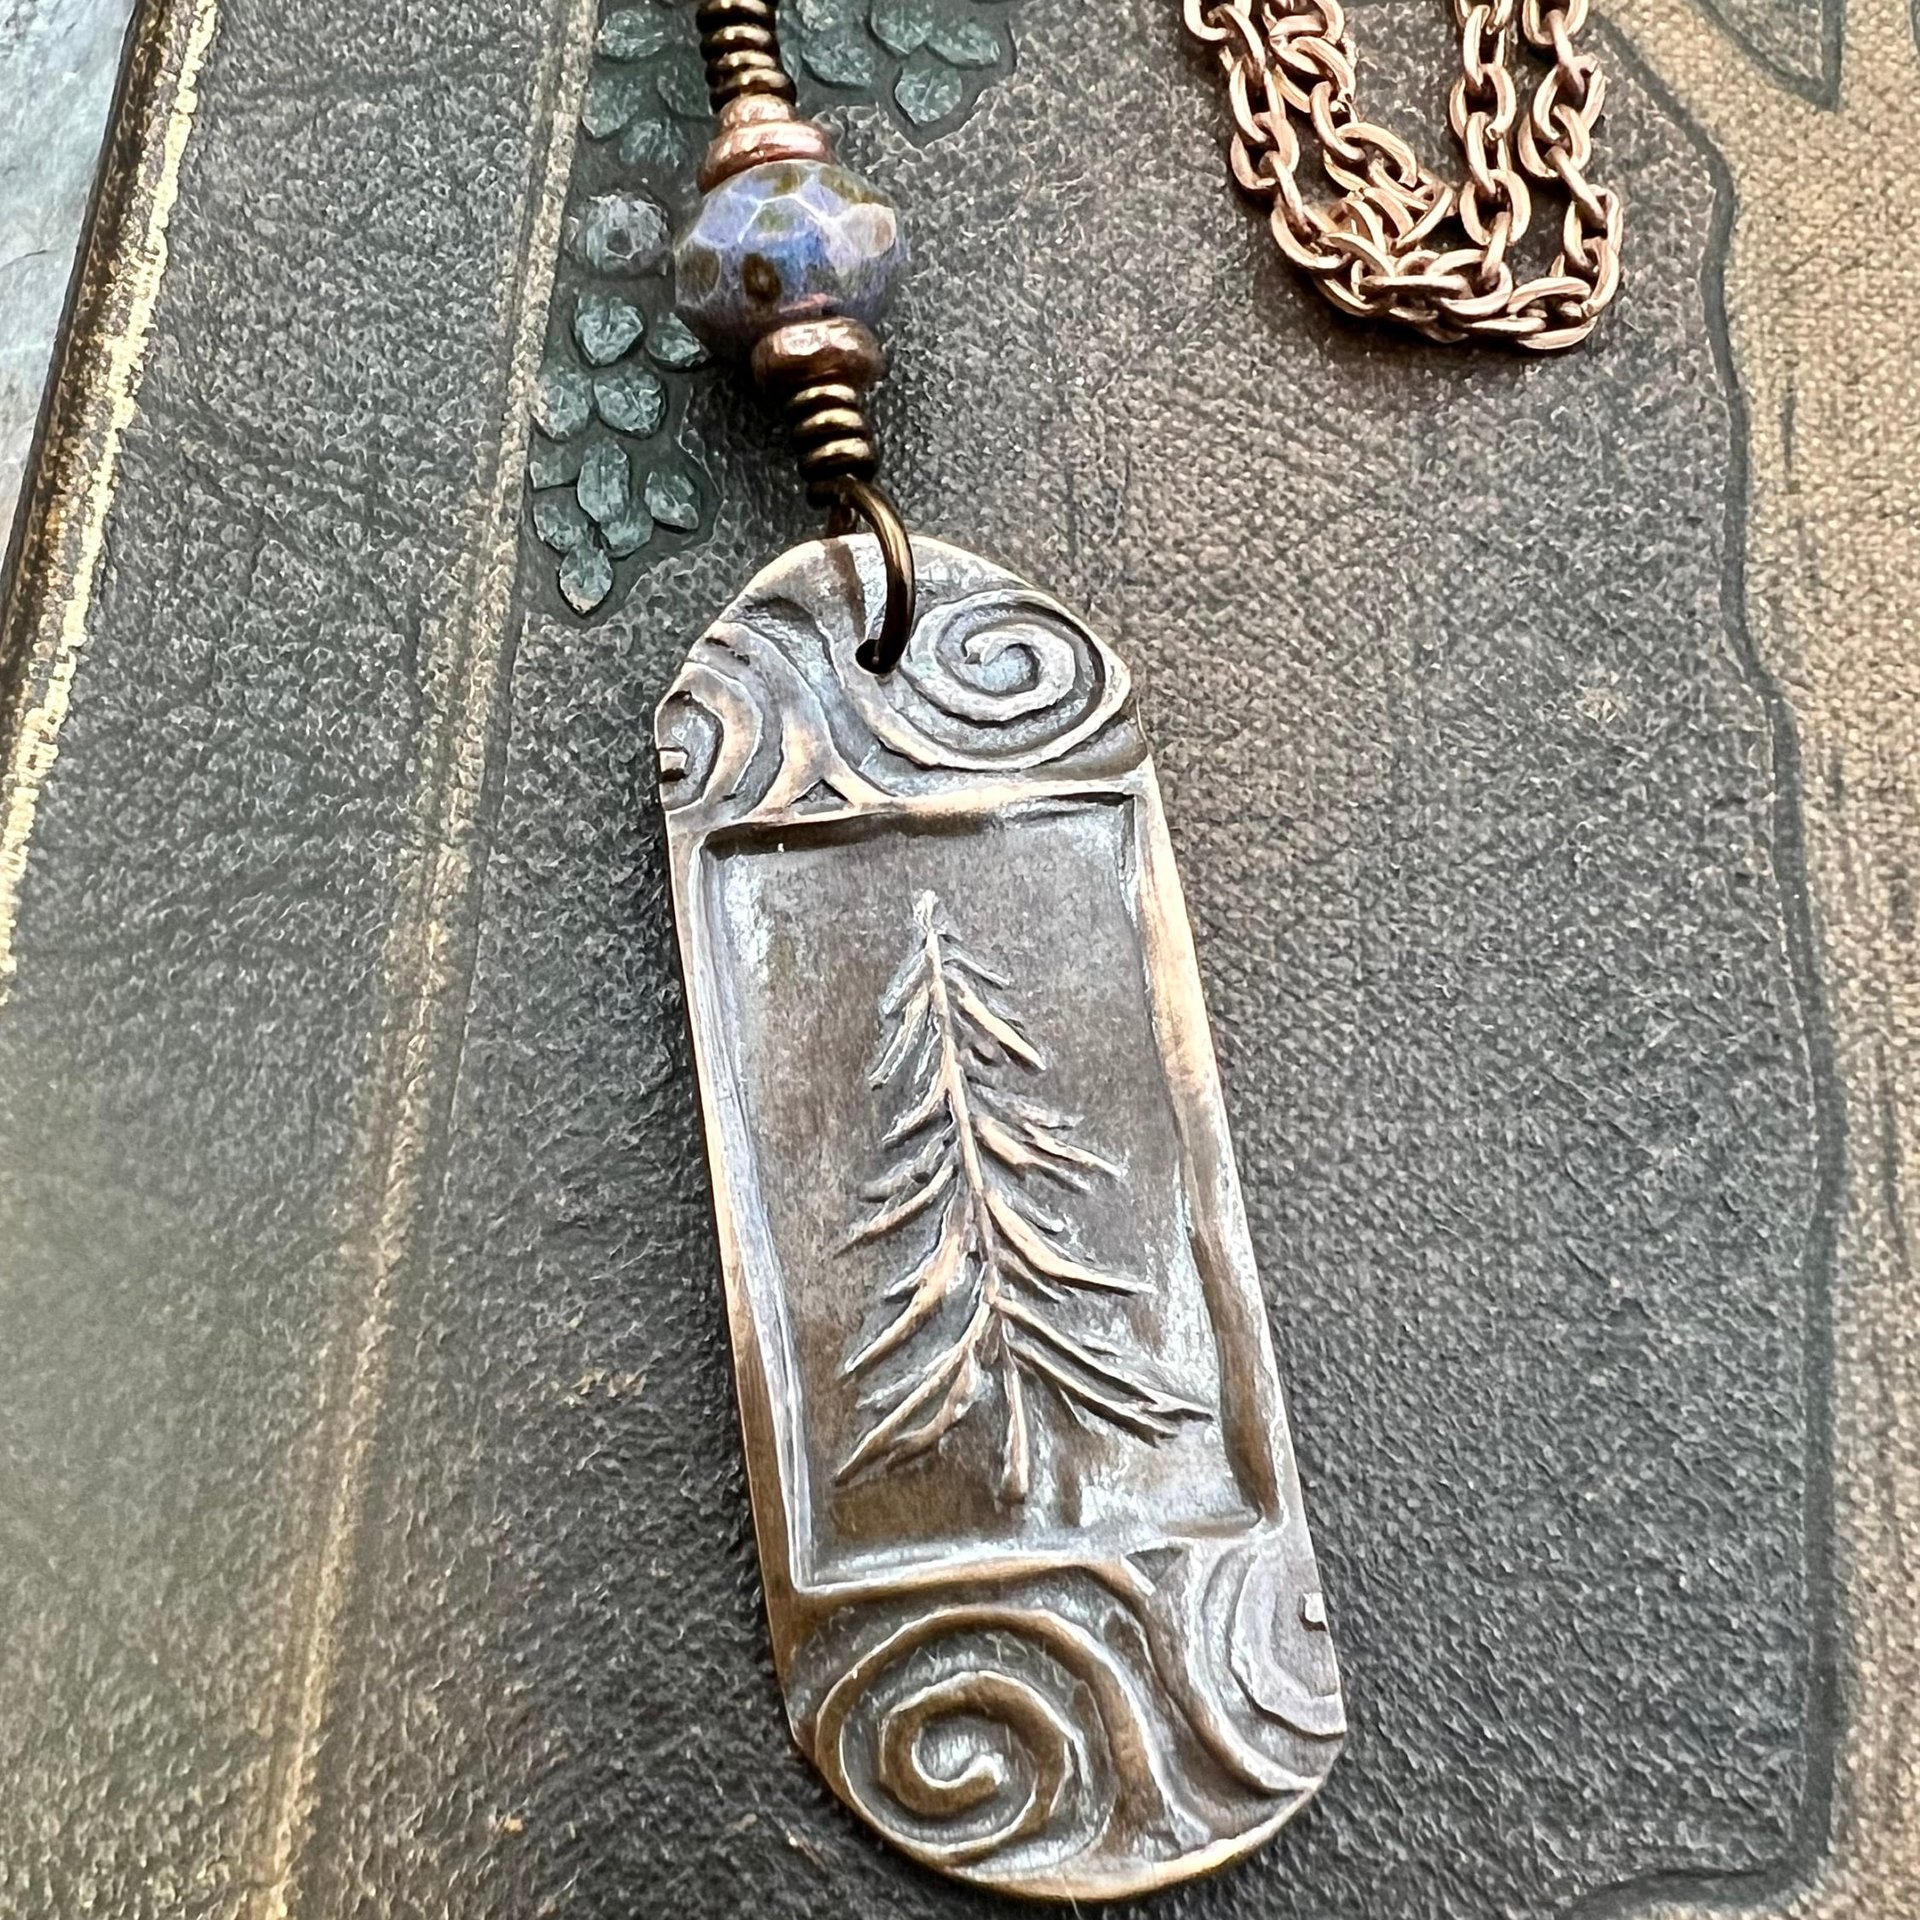 Pine Tree, Copper Pendant, Celtic Spirals, Czech Glass, Evergreen Trees, Earthy Rustic Art Jewelry, Hand Carved, Tree of Life, Pagan Druid